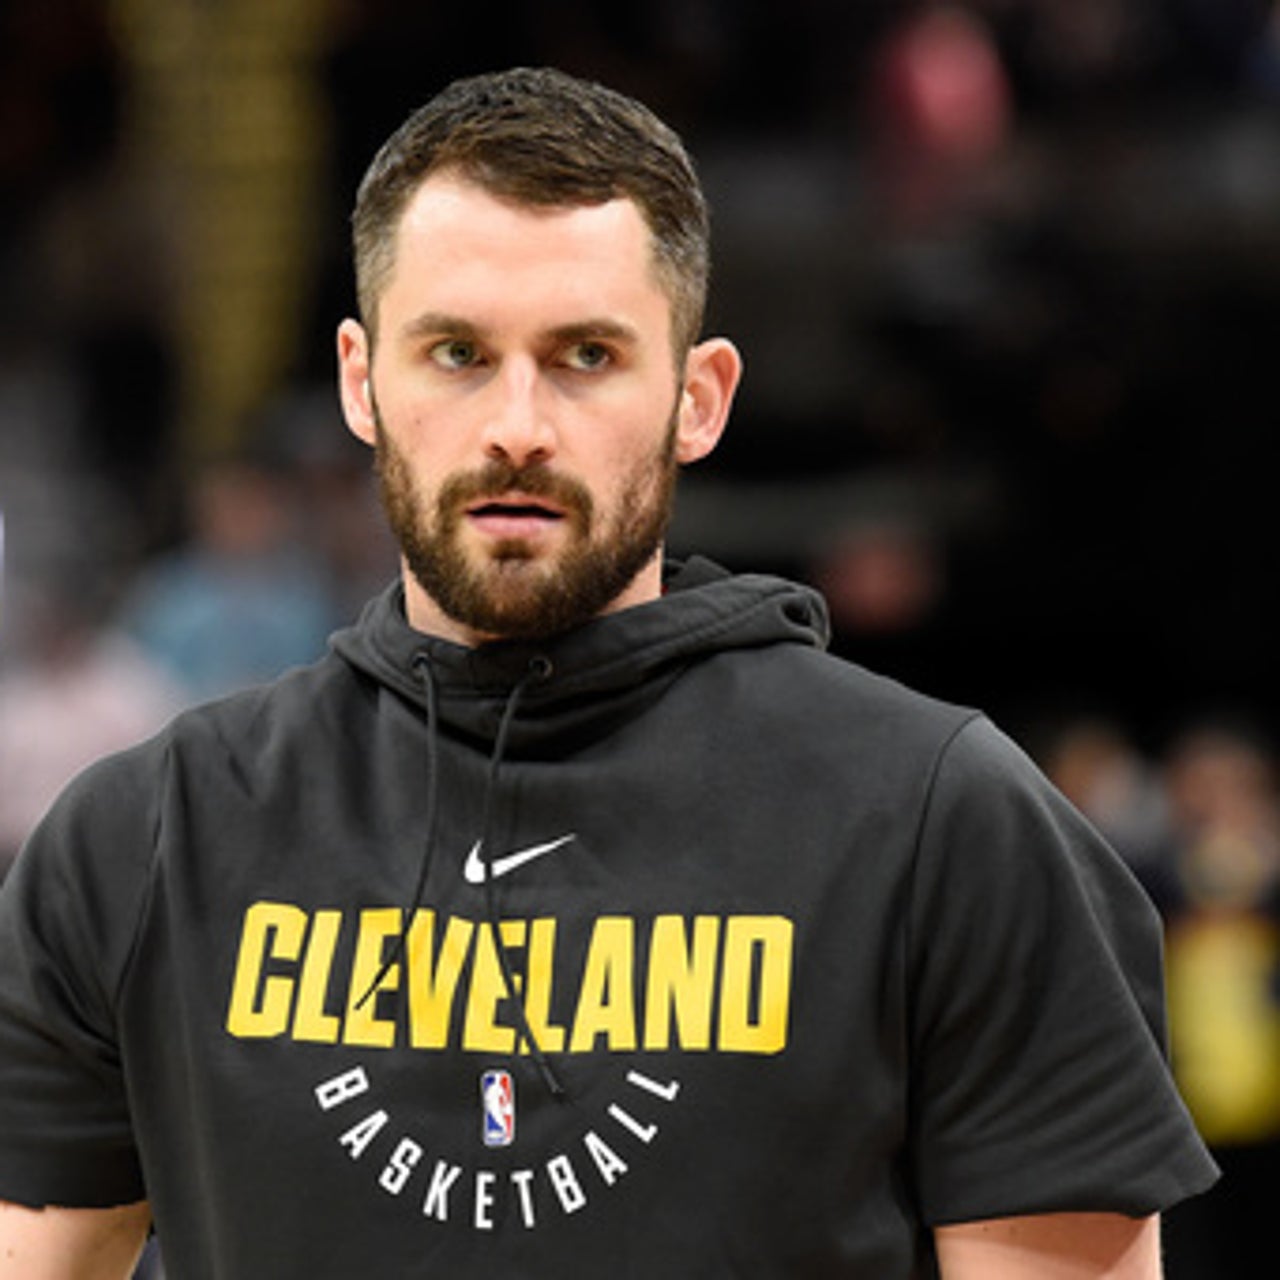 Cavaliers sign All-Star Kevin Love to 4-year, $120M extension